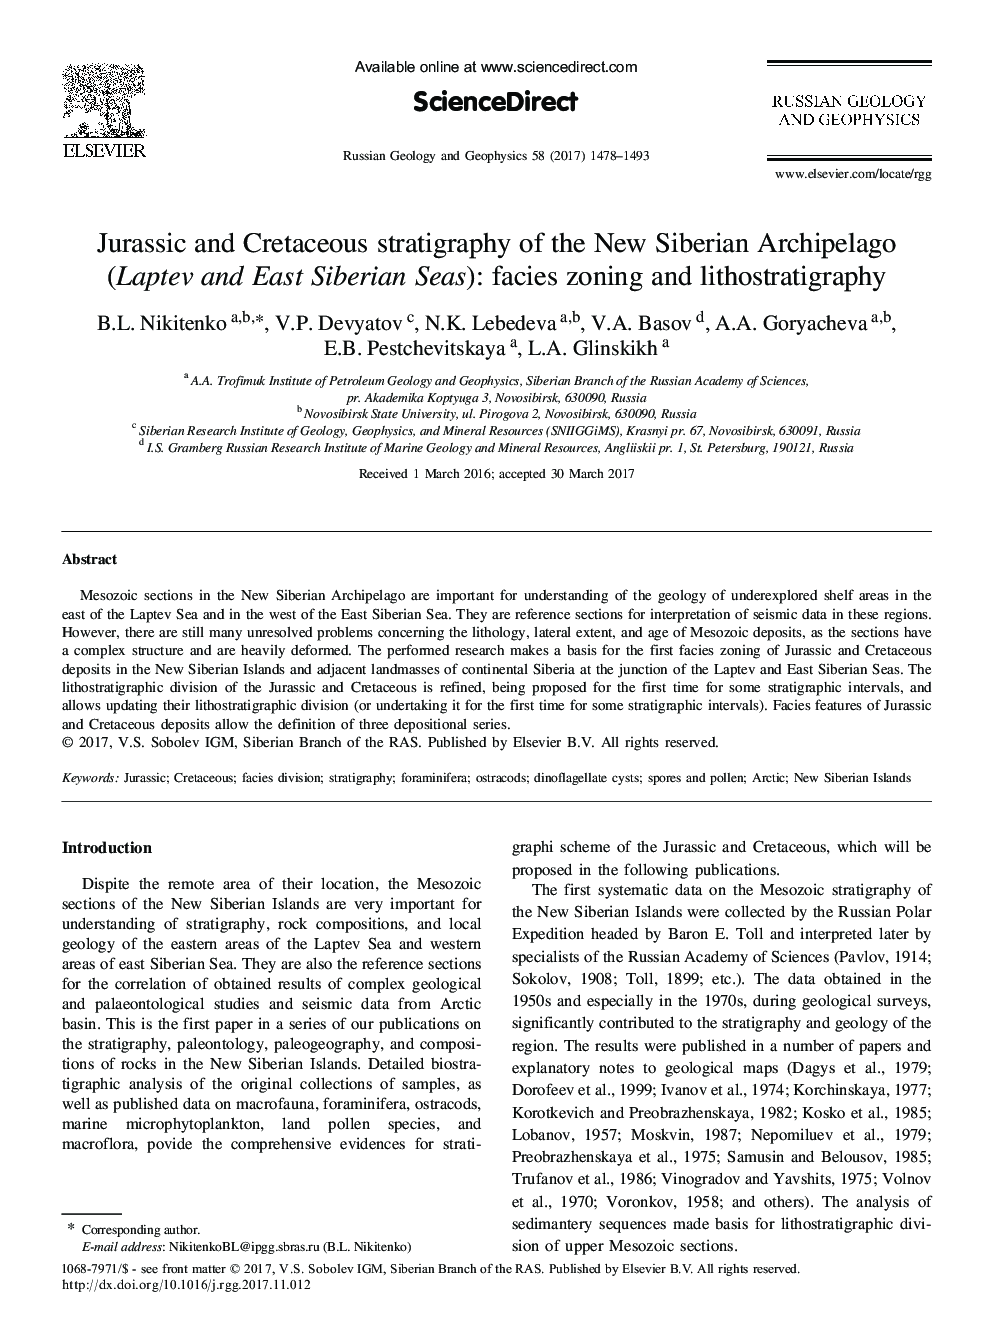 Jurassic and Cretaceous stratigraphy of the New Siberian Archipelago (Laptev and East Siberian Seas): facies zoning and lithostratigraphy